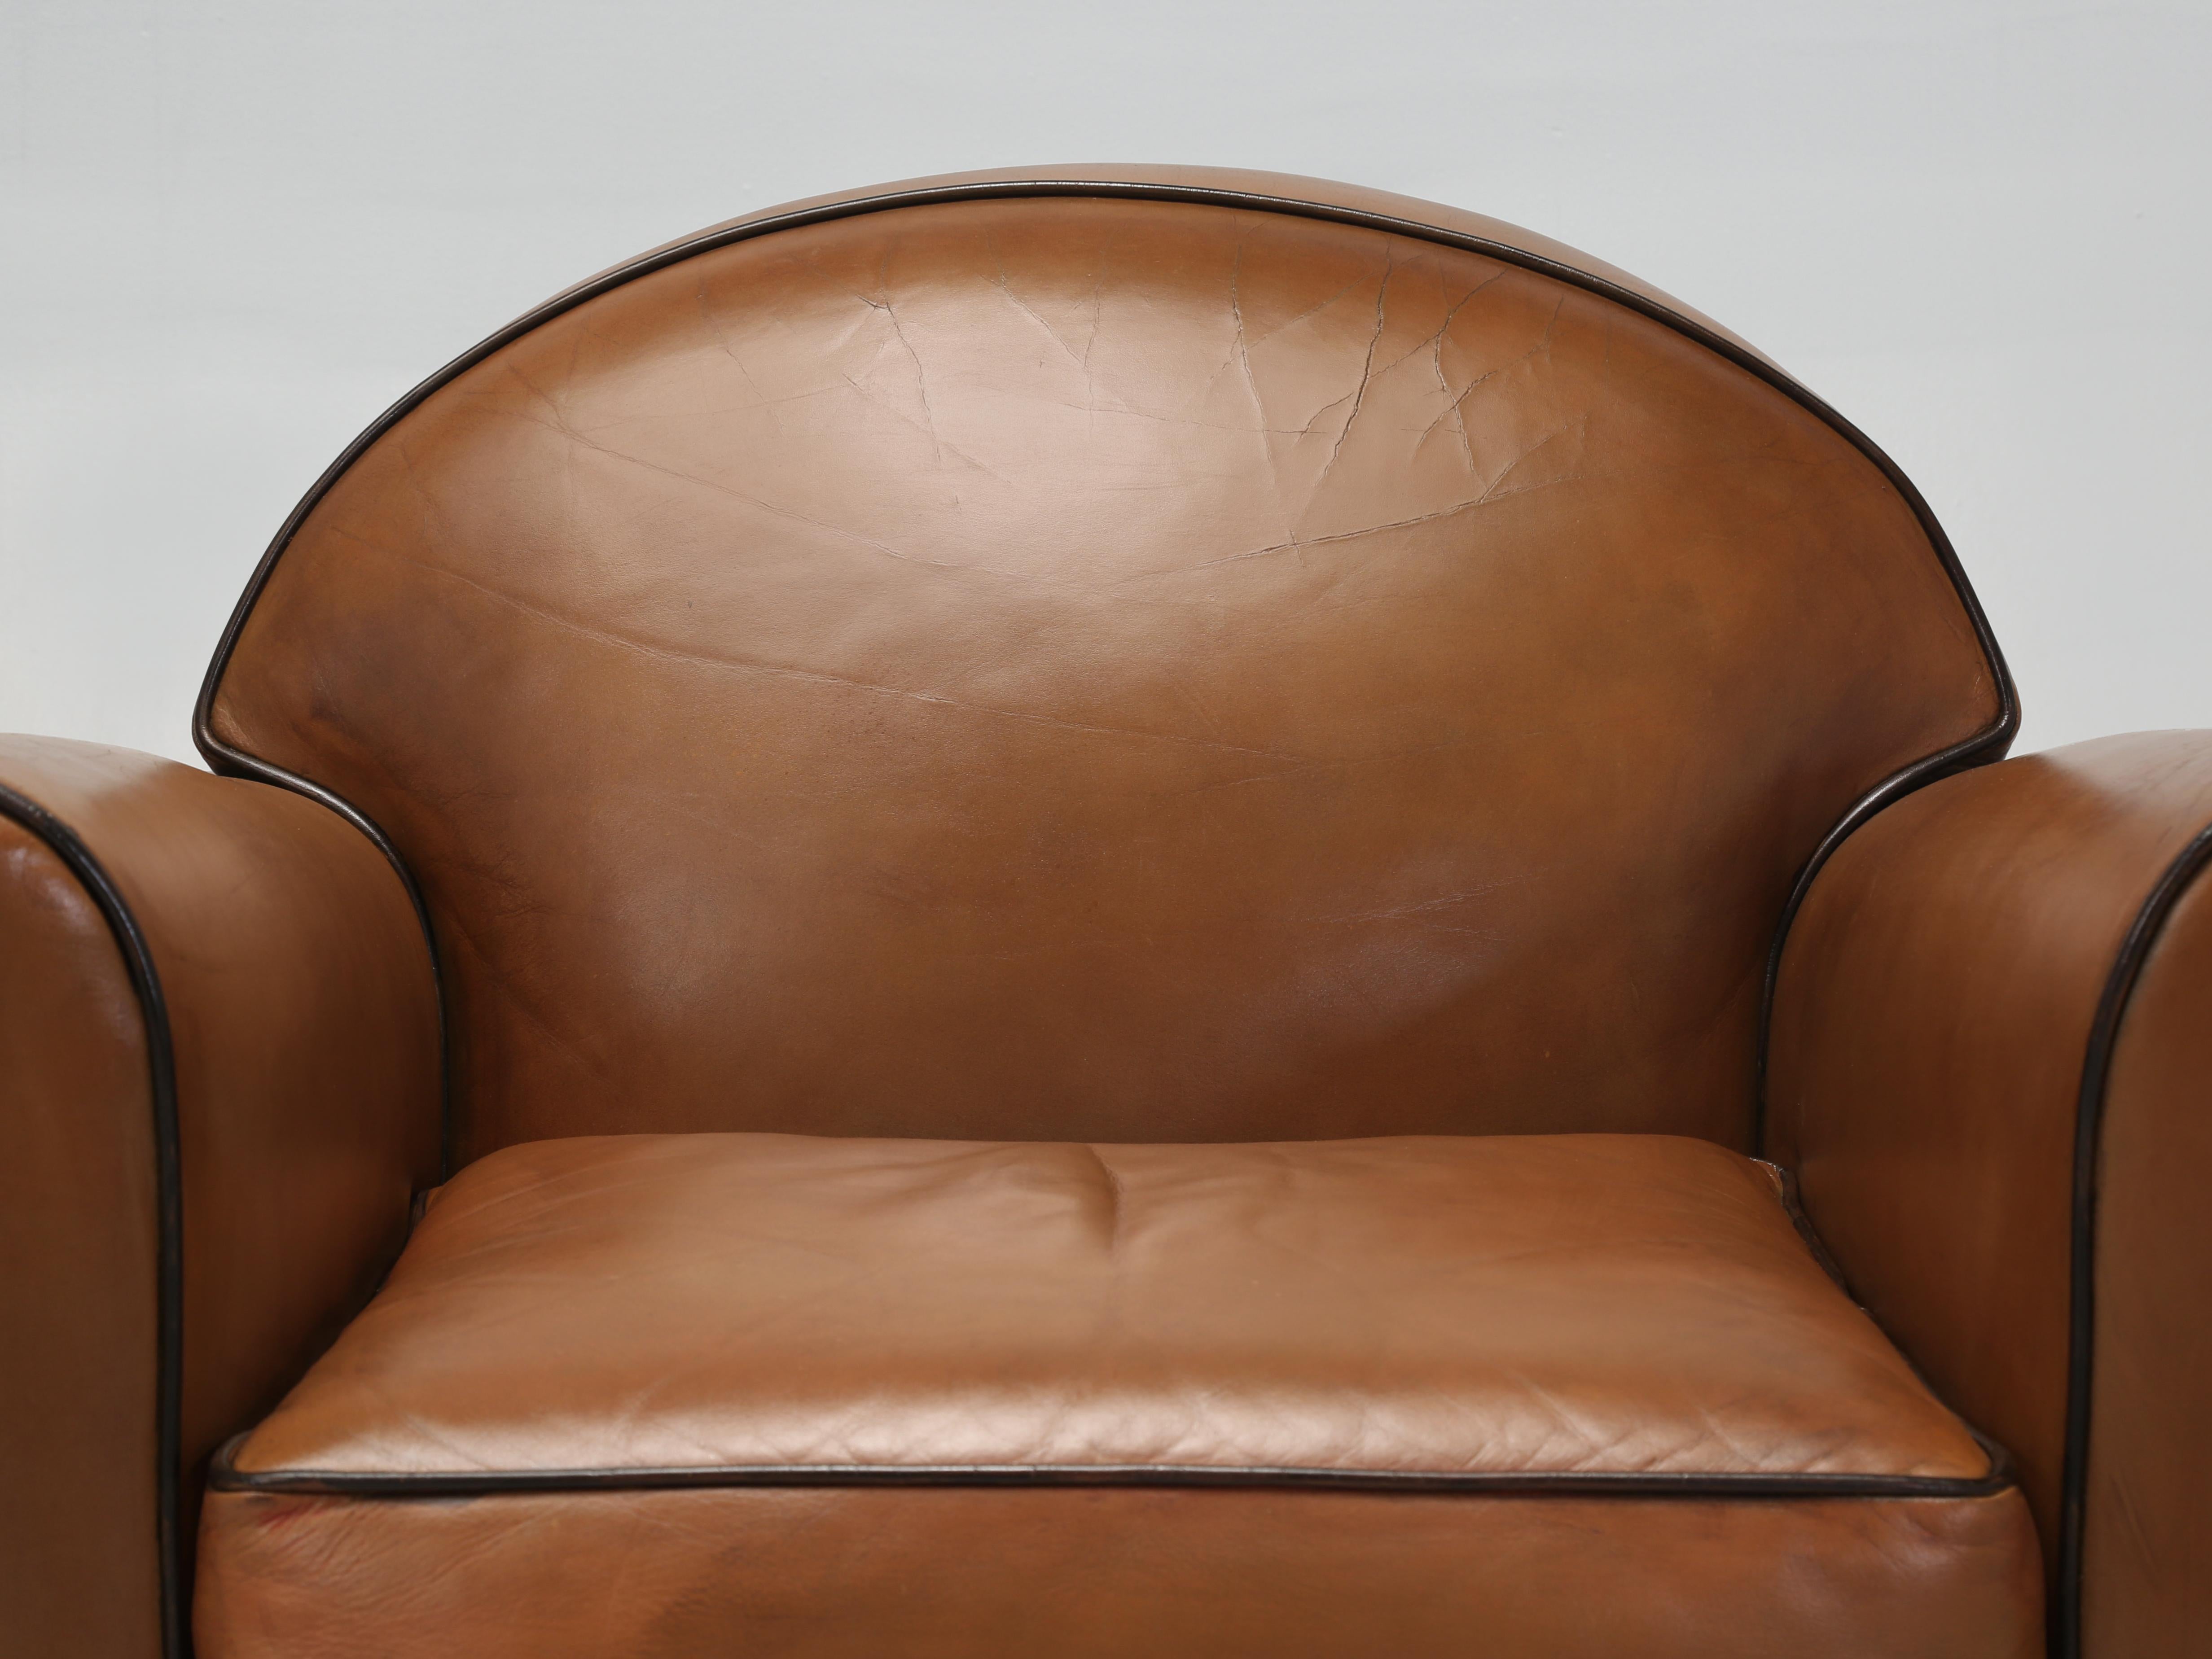 Art Deco Vintage French Leather Club Chairs, by the French firm of HUGUES CHEVAL of Paris